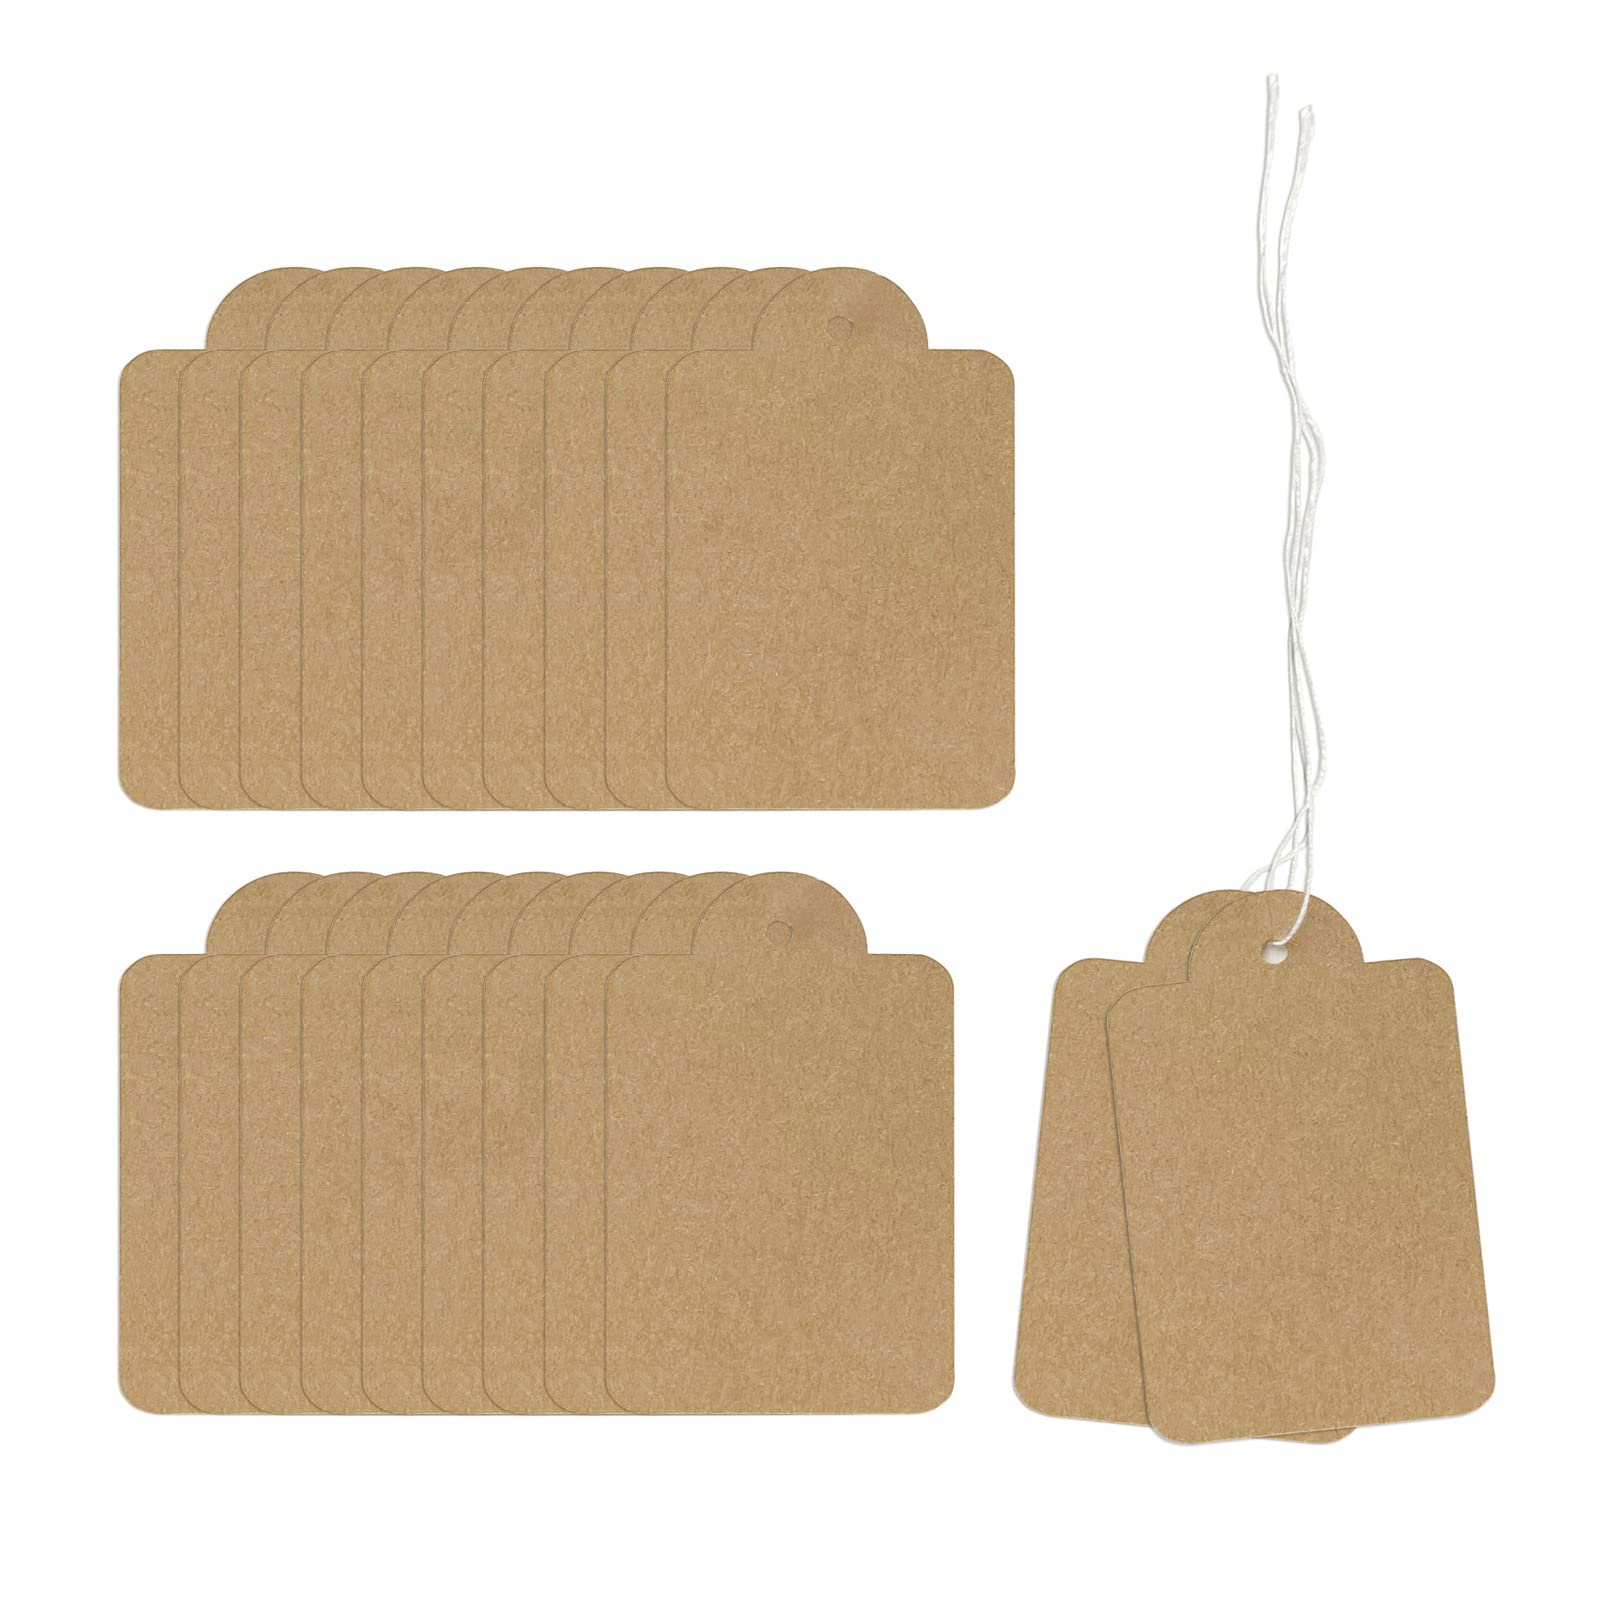 Kraft Paper Gift Tags with String, 500Pcs Blank Writable Tags Natural  Twine, Display Label for Jewelry Clothing Crafts 1.89 1.18 Inches 1.89  1.18